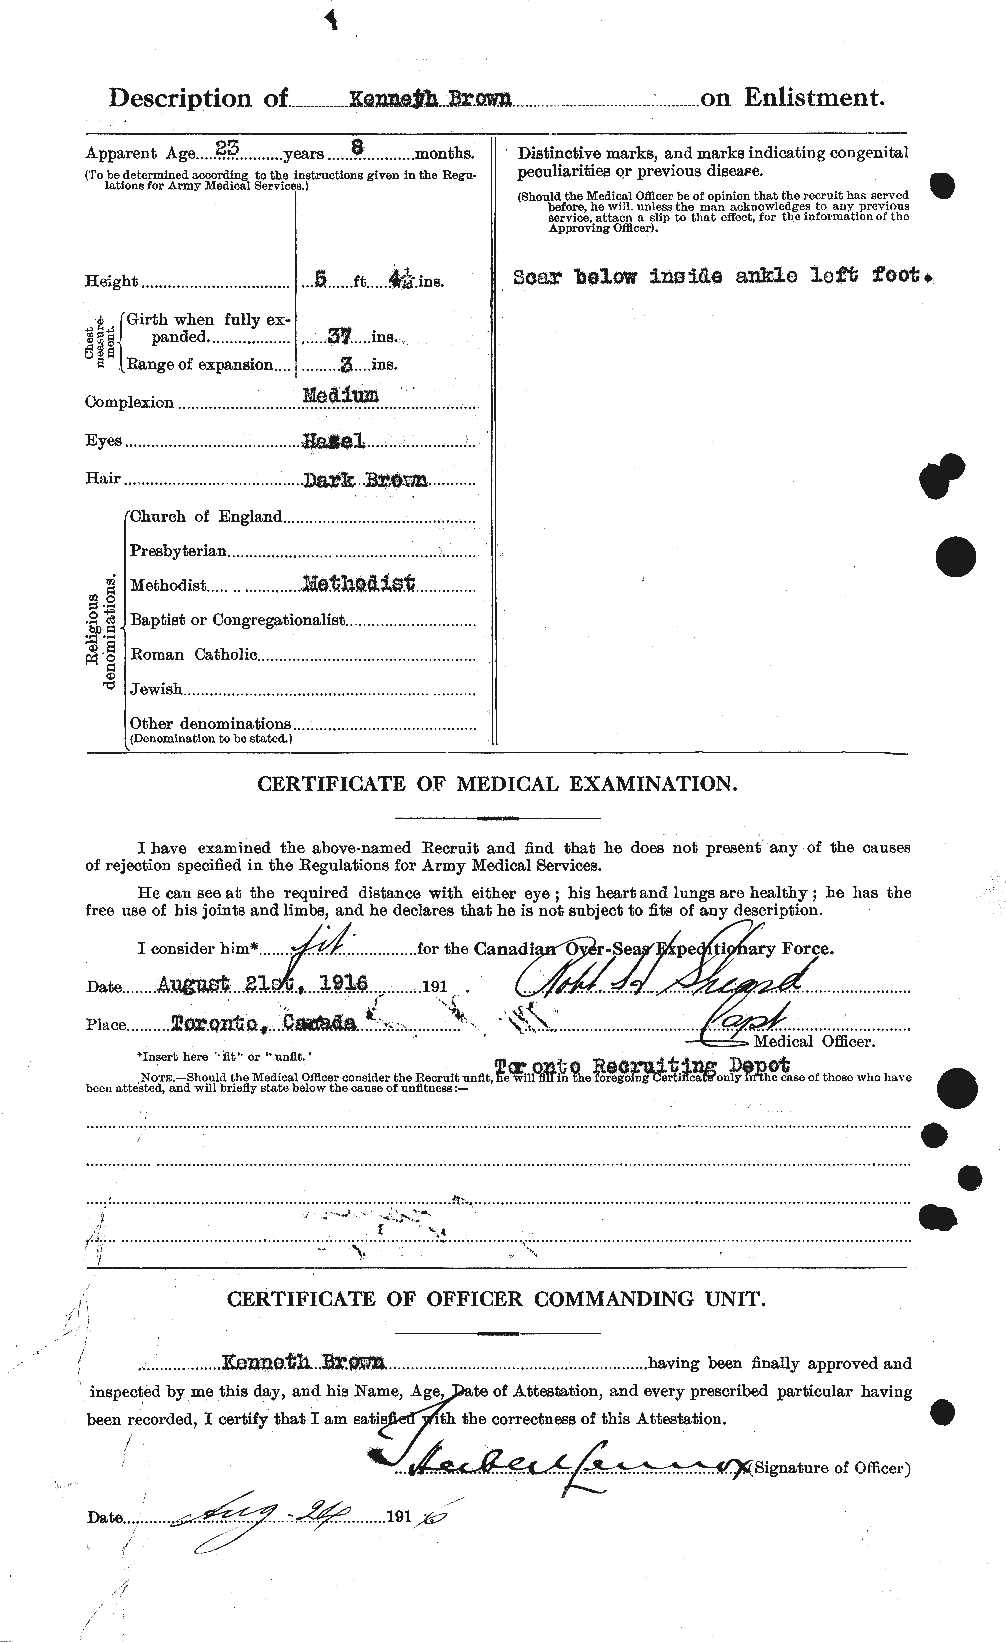 Personnel Records of the First World War - CEF 266243b